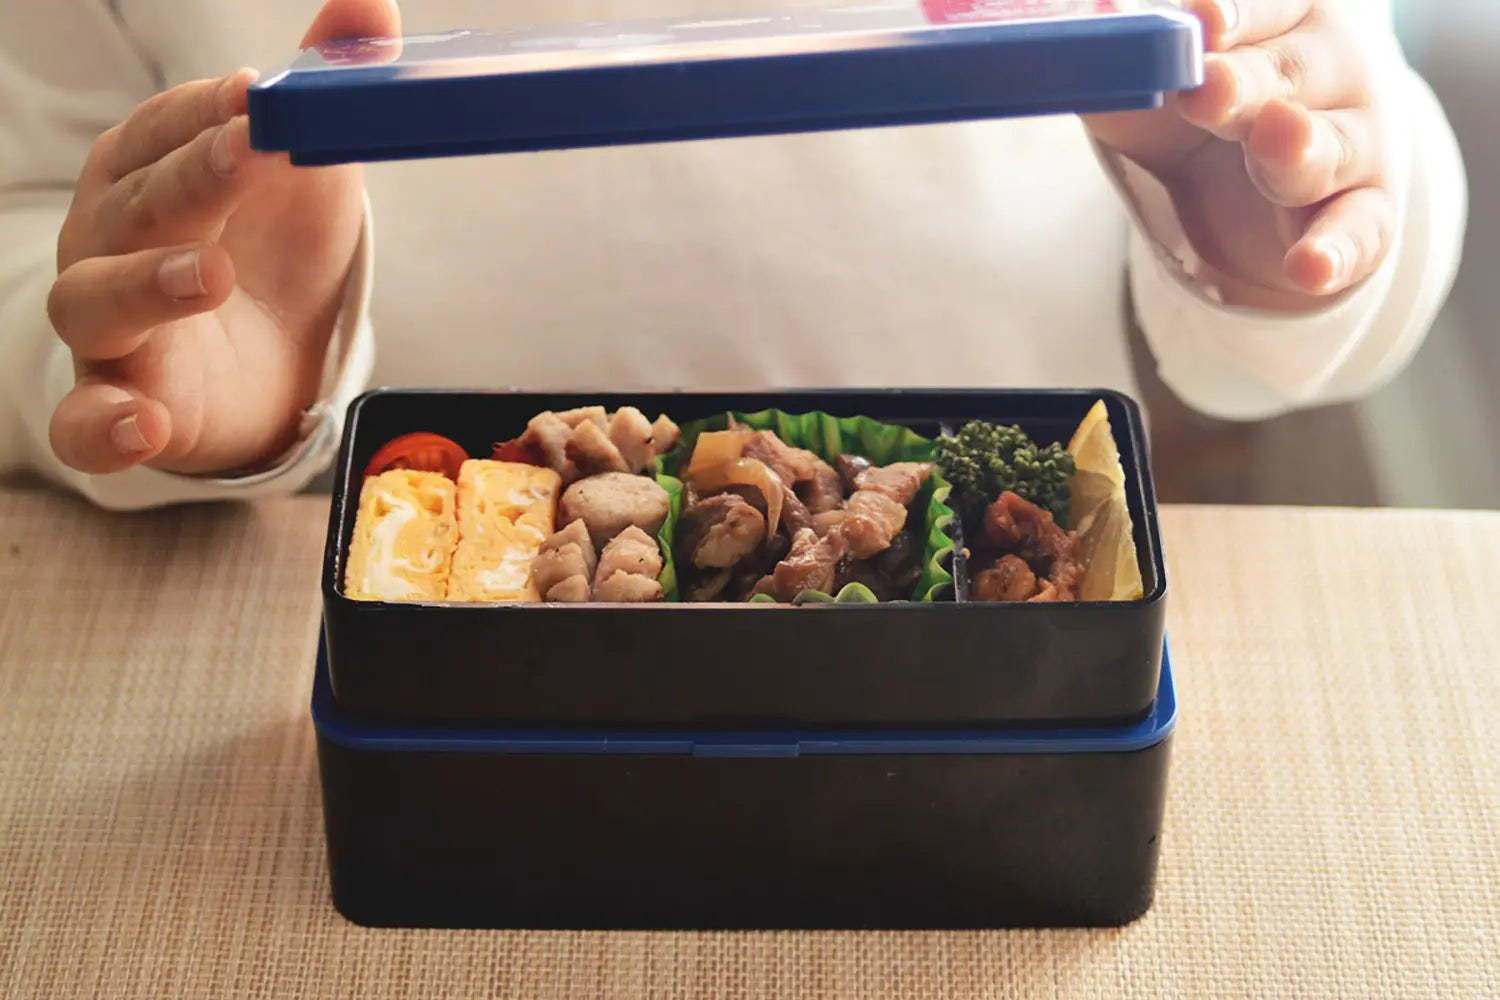 During this season when many people start a new school or a new job, the demand for Bento lunch boxes increases. Would you like a new Bento box for the beginning of the new chapter as well?